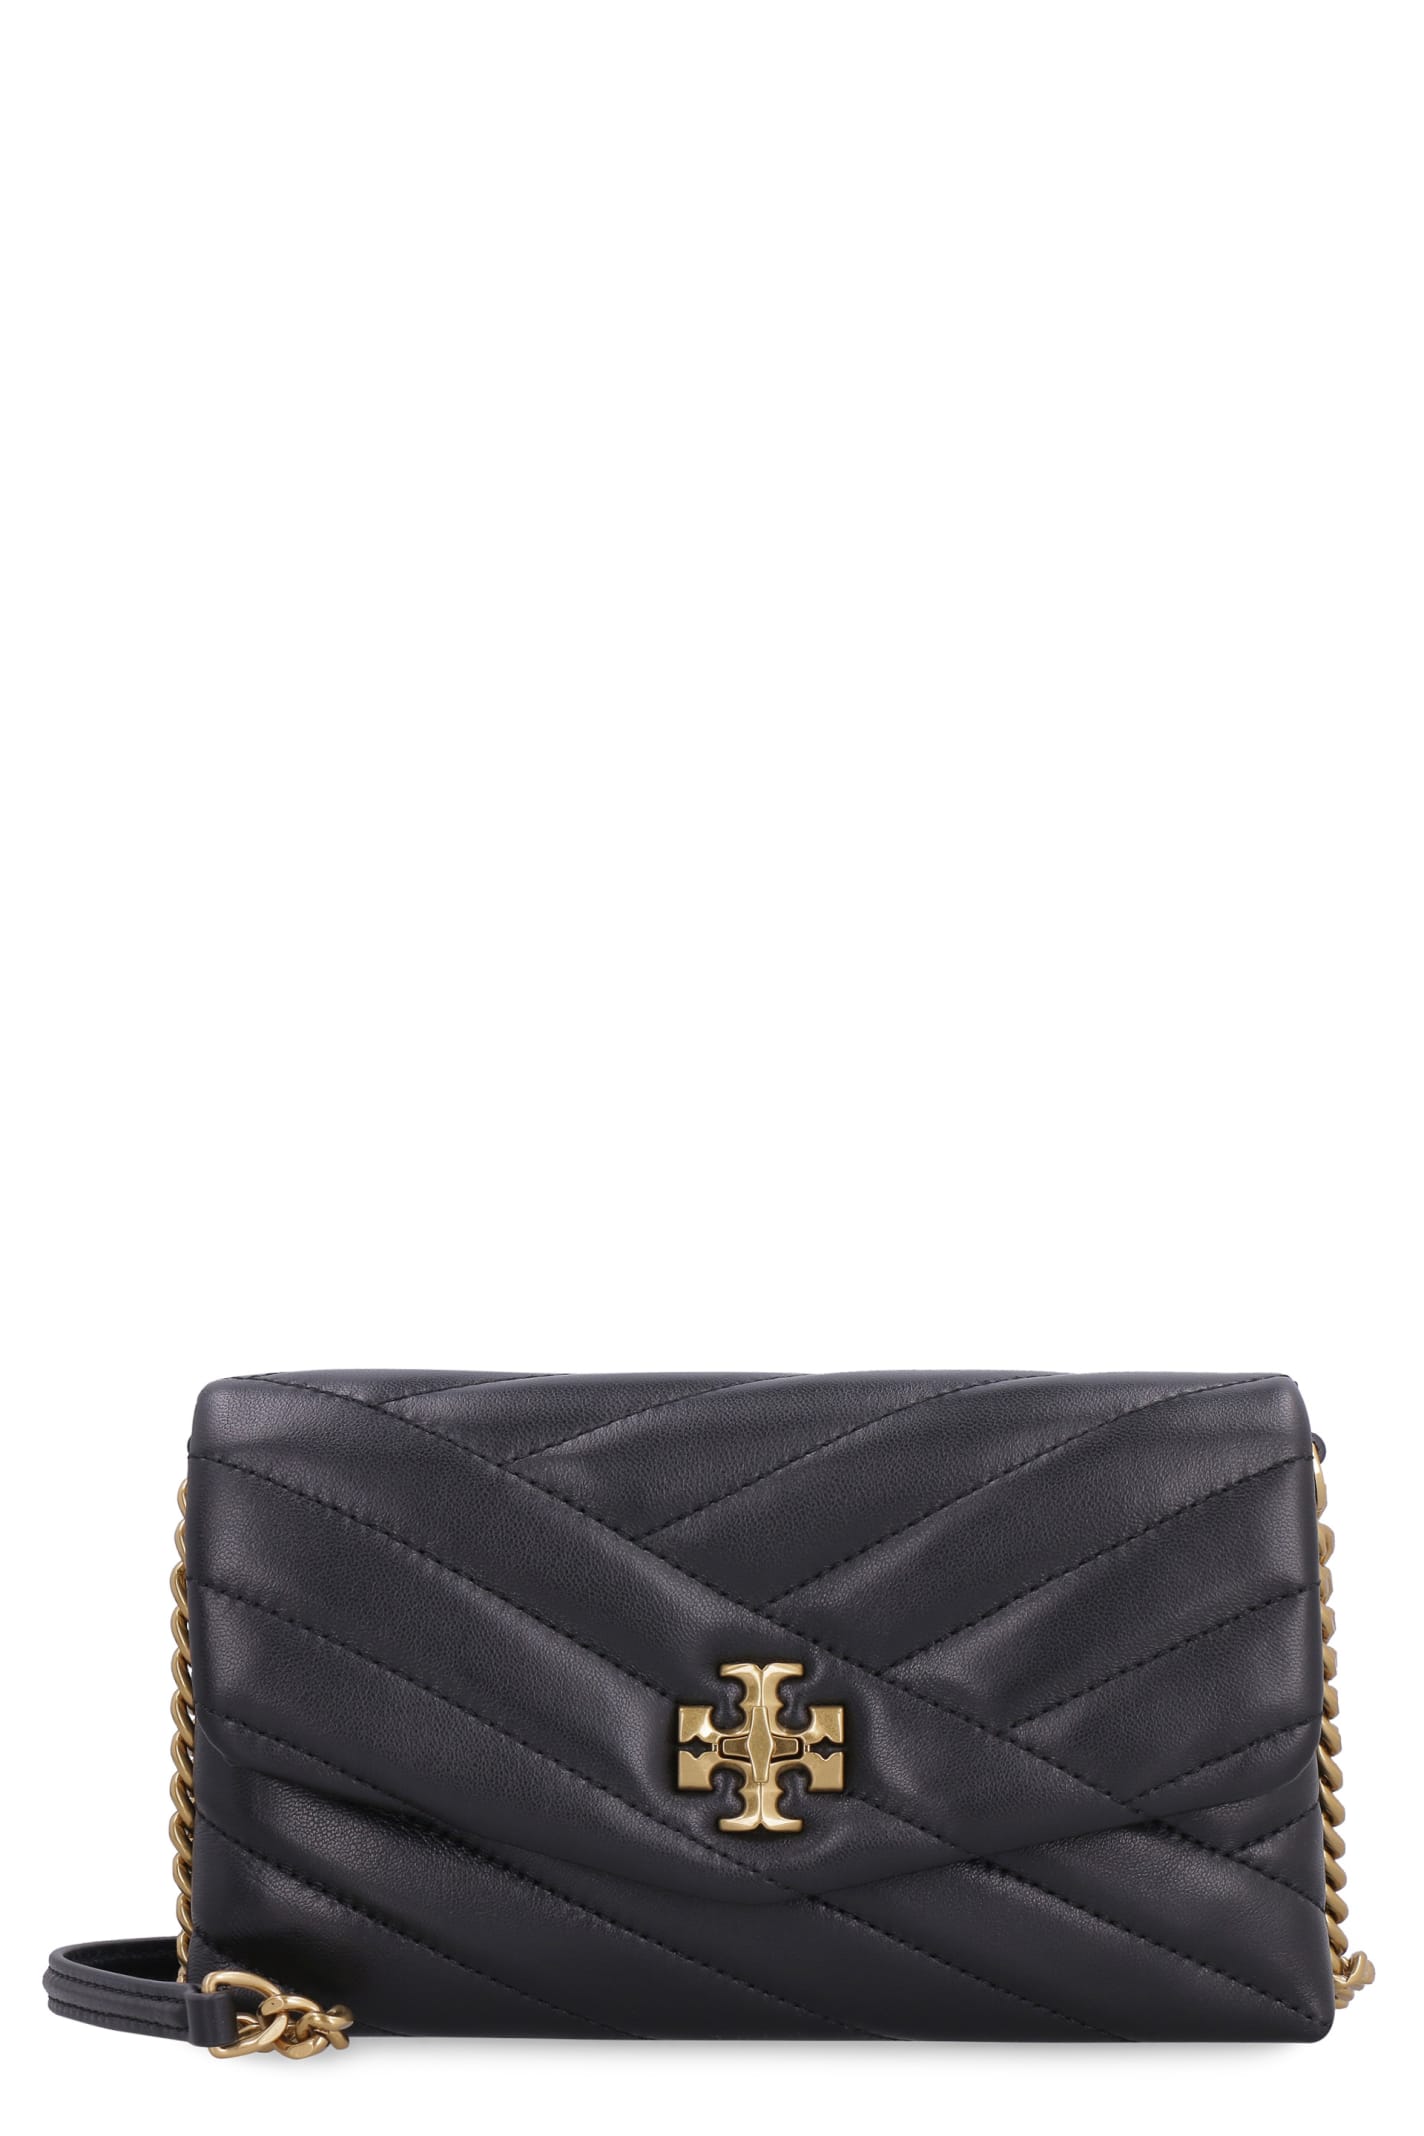 TORY BURCH KIRA QUILTED LEATHER WALLET ON CHAIN